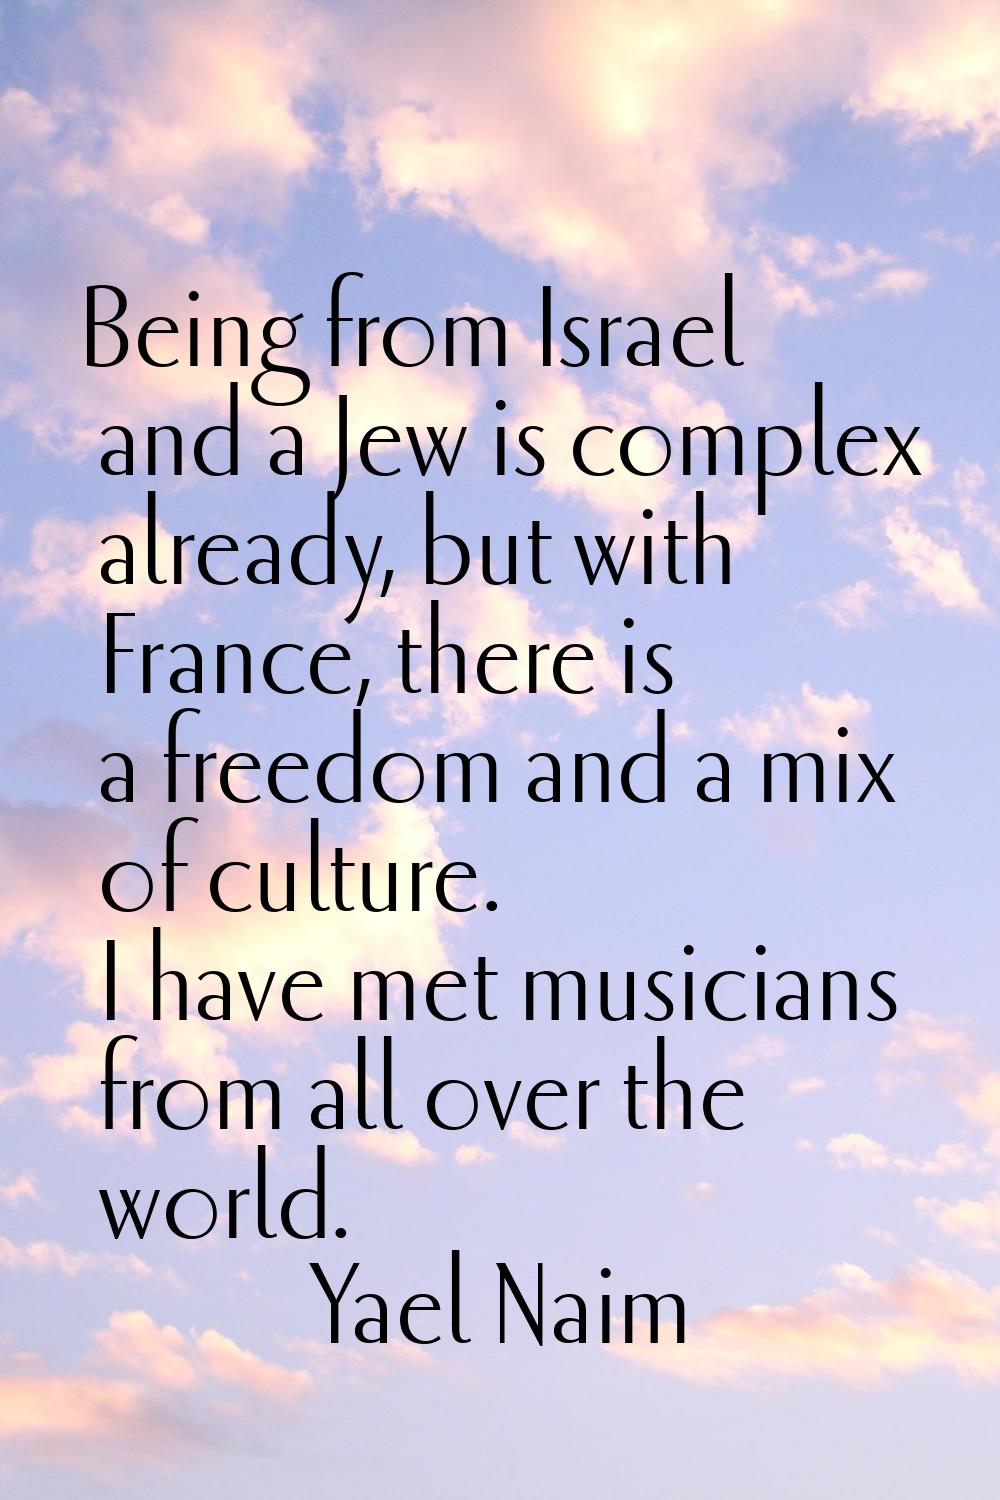 Being from Israel and a Jew is complex already, but with France, there is a freedom and a mix of cu